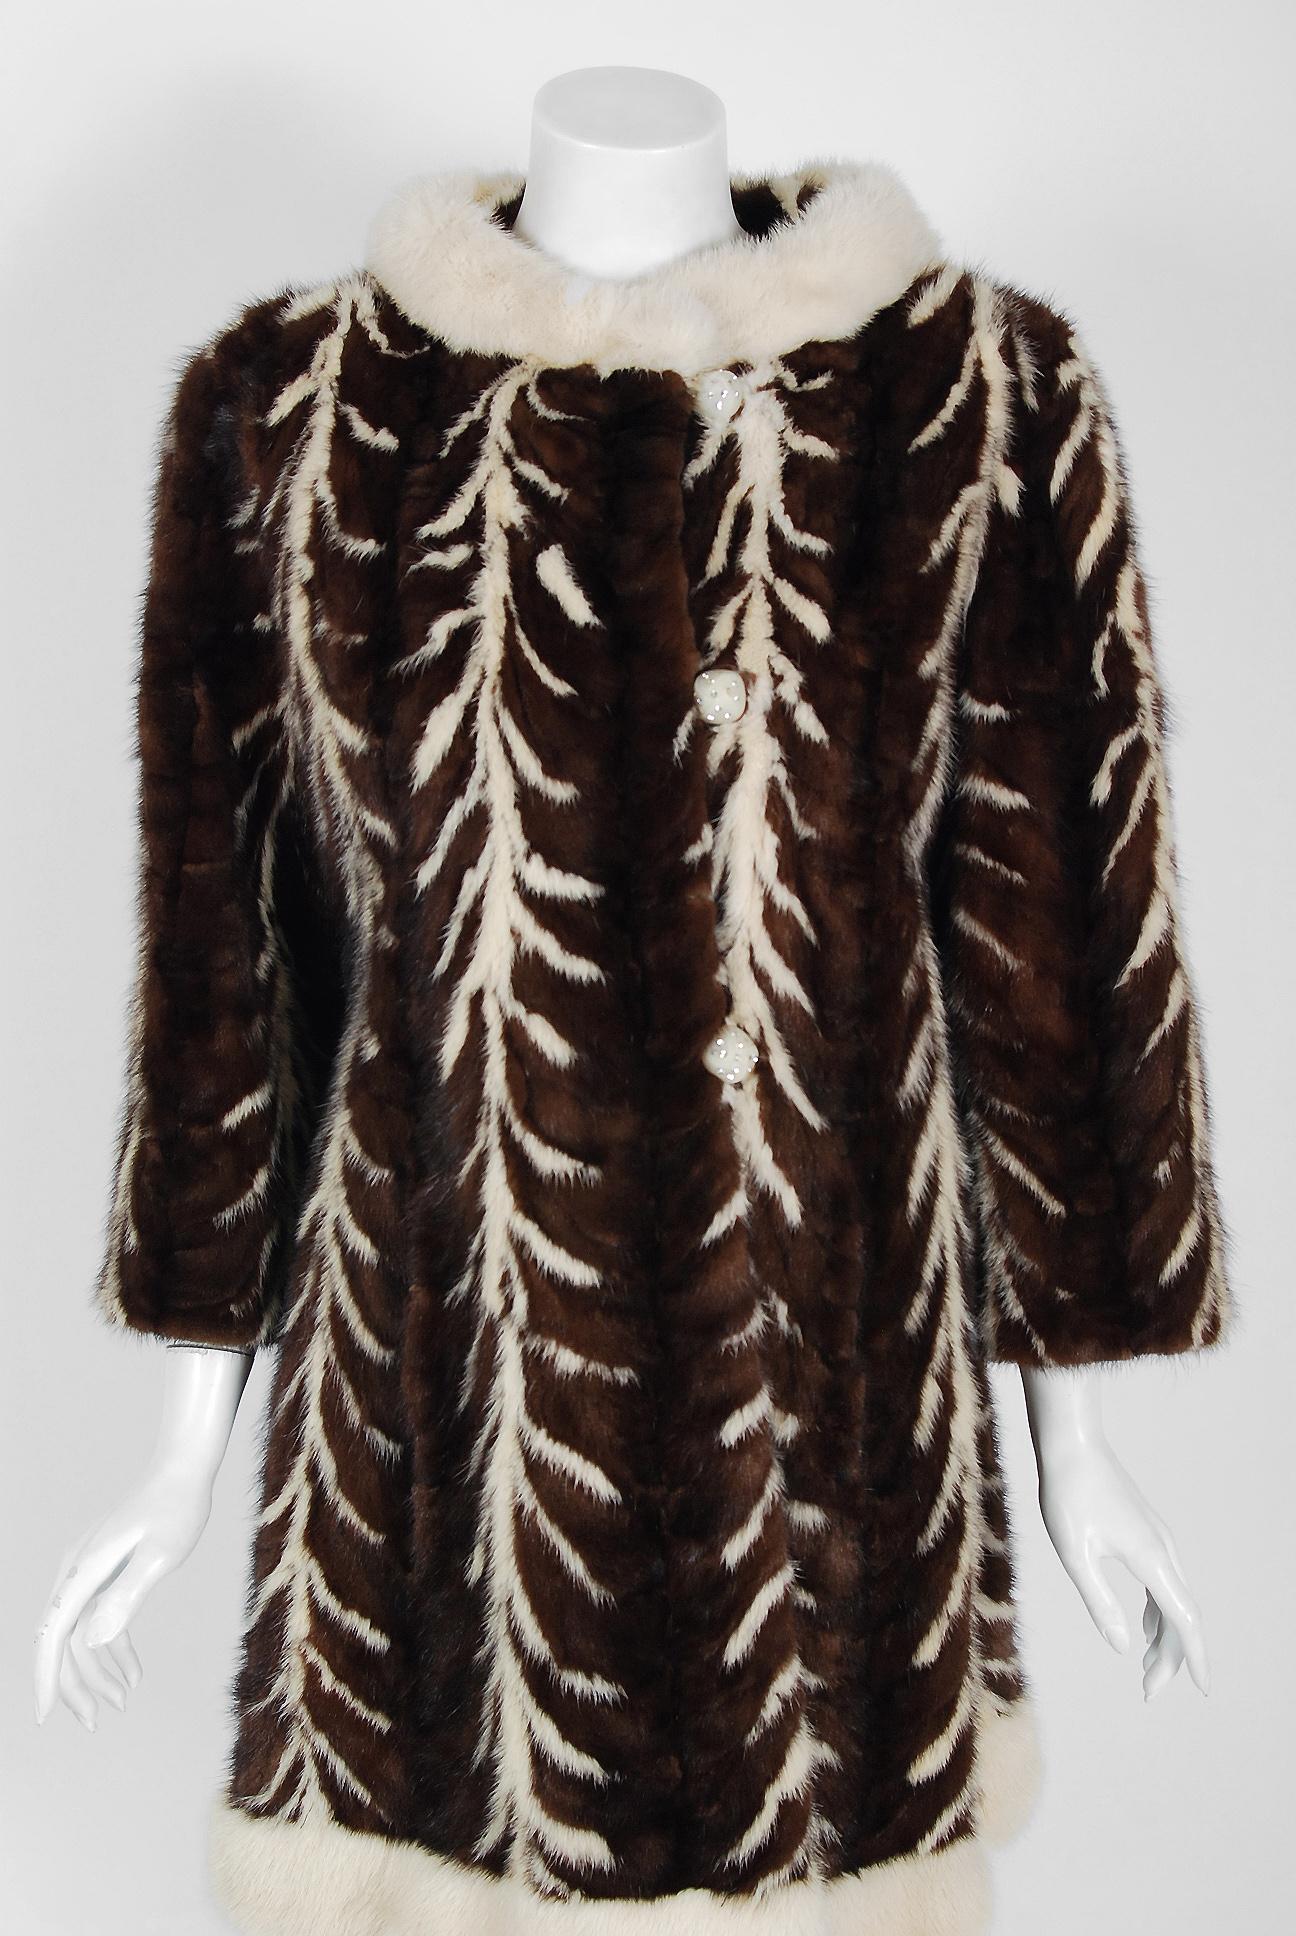 A breathtaking late 1960's ivory and chocolate-brown colored genuine mink fur from the exclusive high-end couture boutique Arnold Constable. This tailored designer coat will make any woman shine during cold winter months. It is easy to see the level